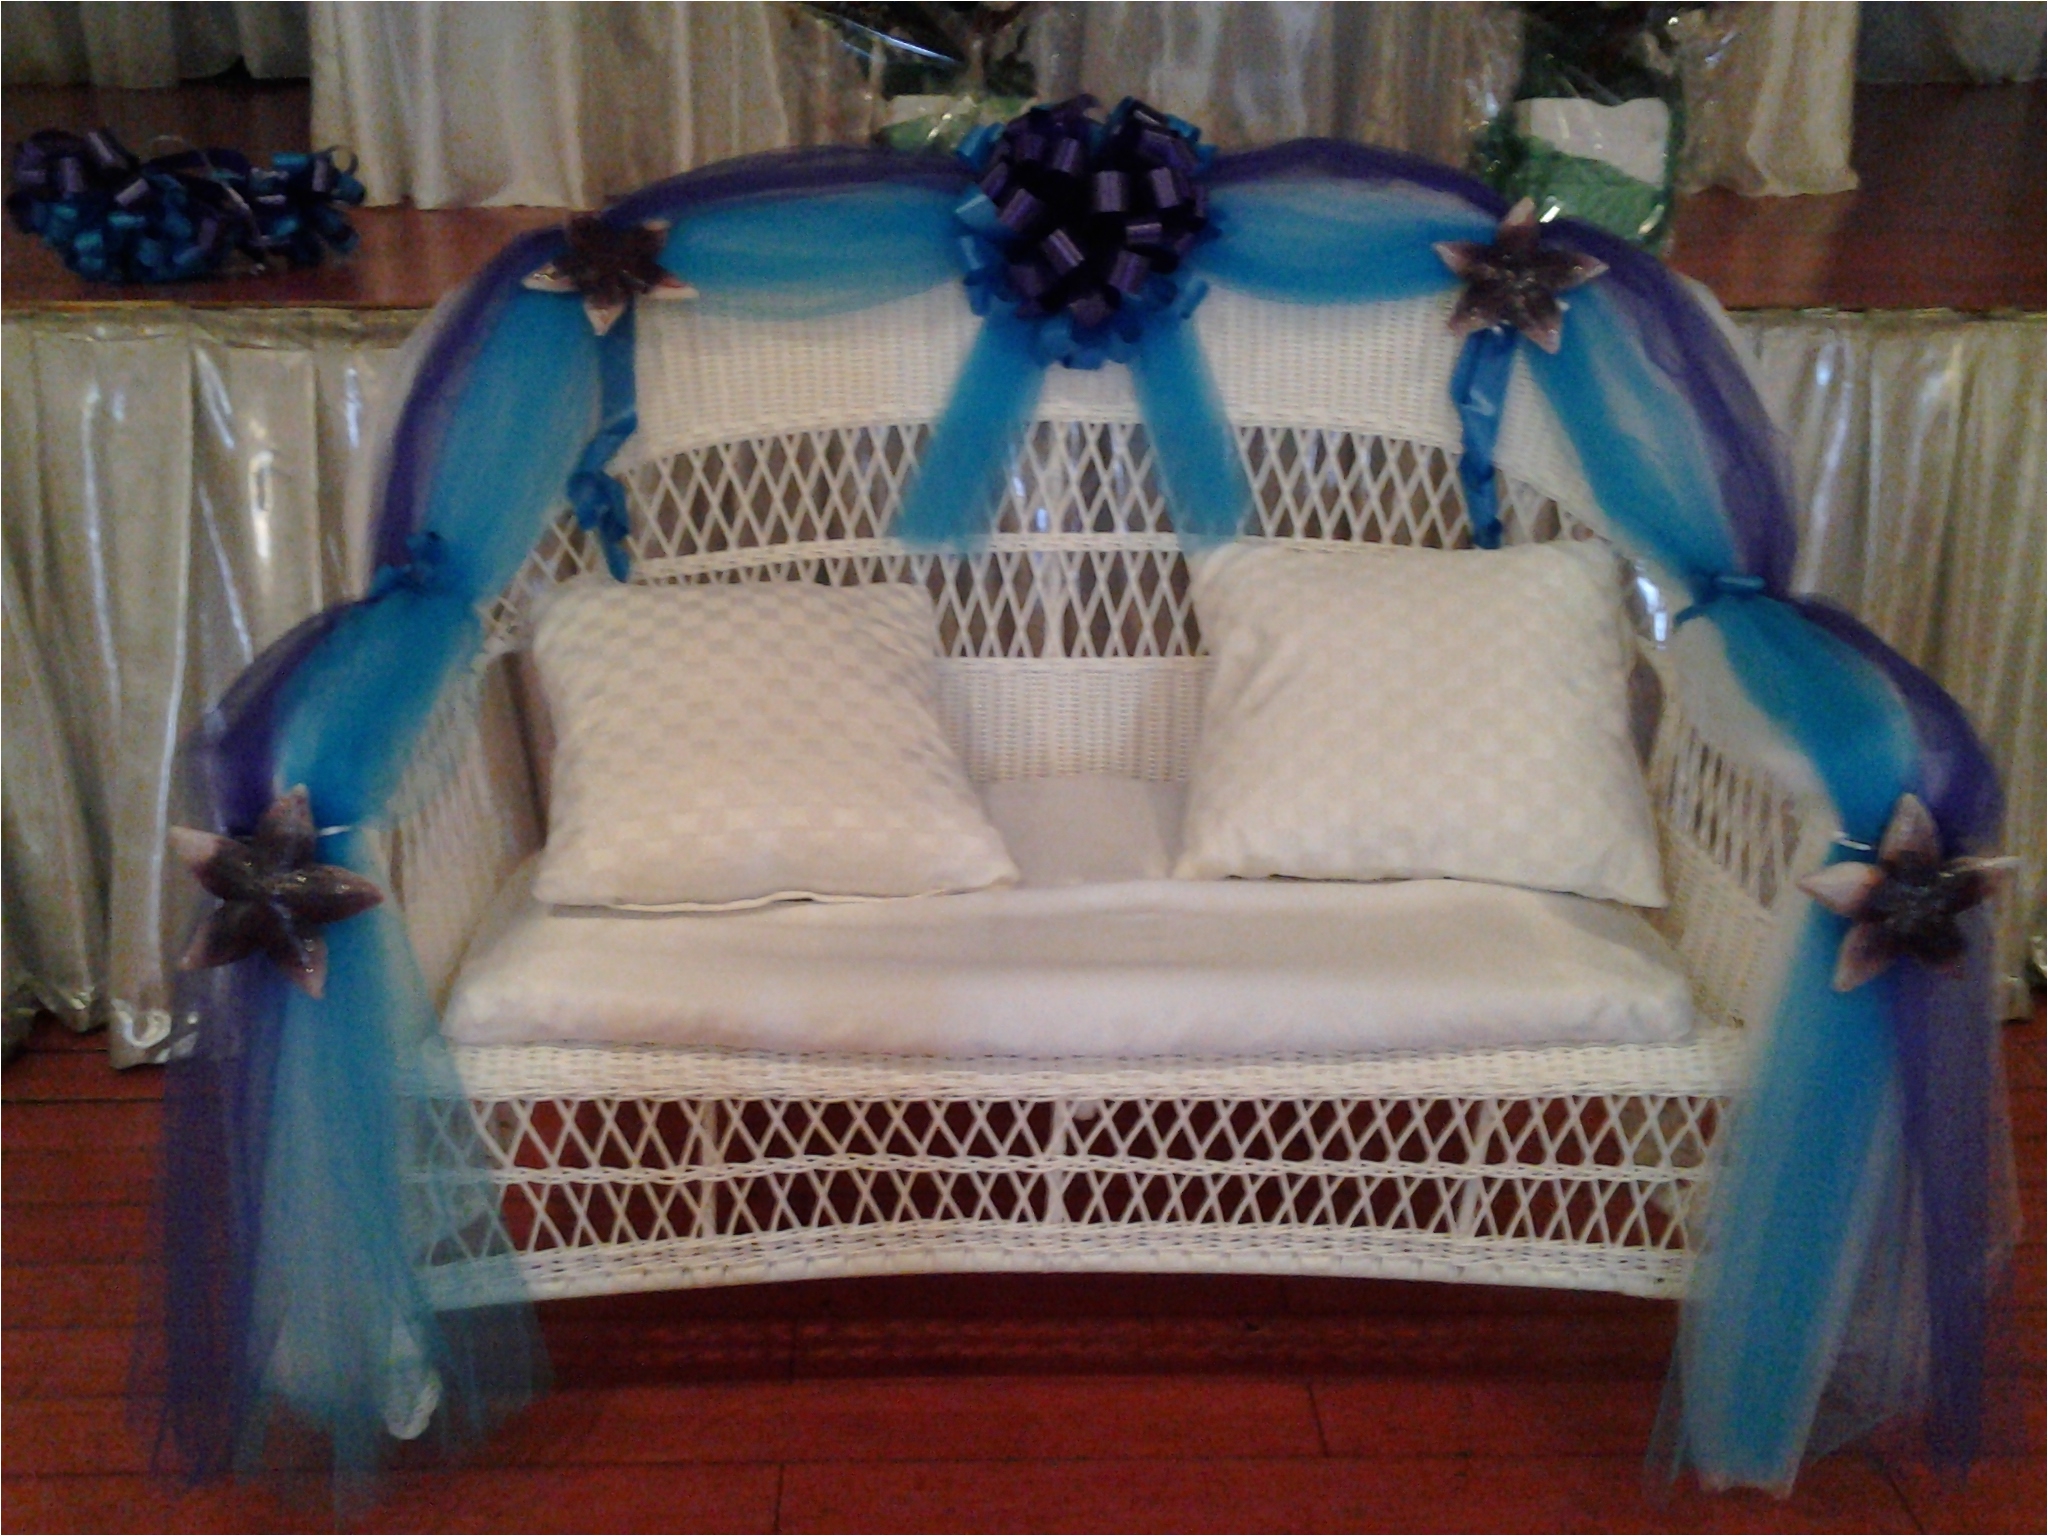 Baby Shower Chairs for Rent In Brooklyn Baby Shower Party Rentals Images Handicraft Ideas Home Decorating